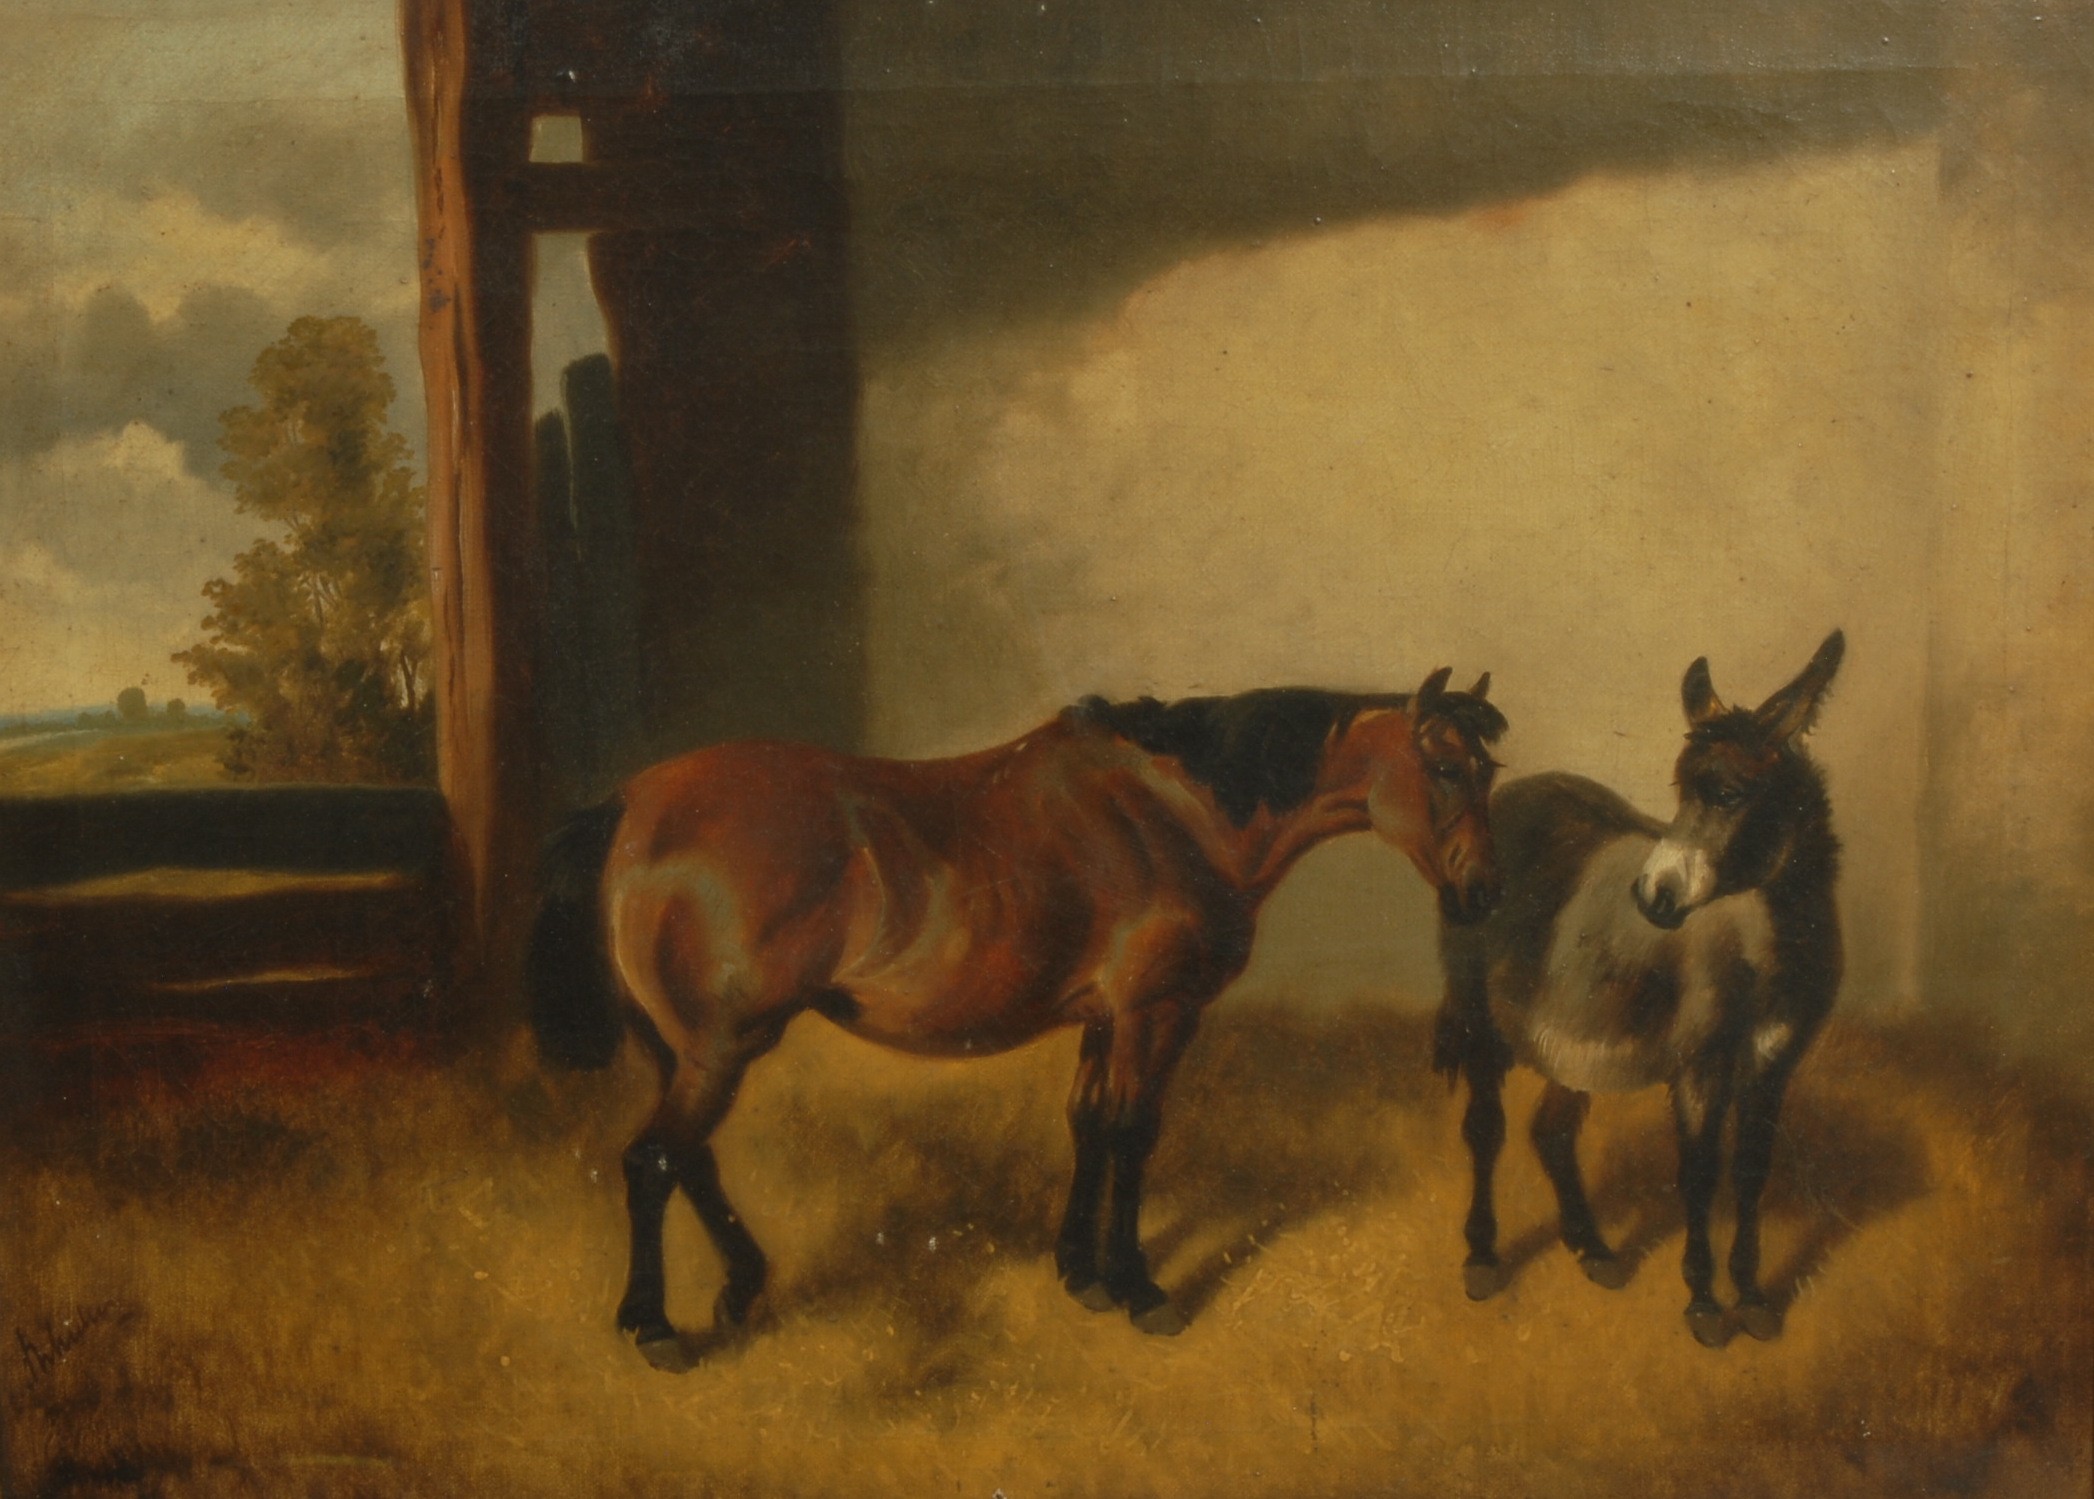 John Alfred Wheeler (1821 - 1903) Stable Mates, Horse and Donkey signed, oil on canvas, 36.5cm x